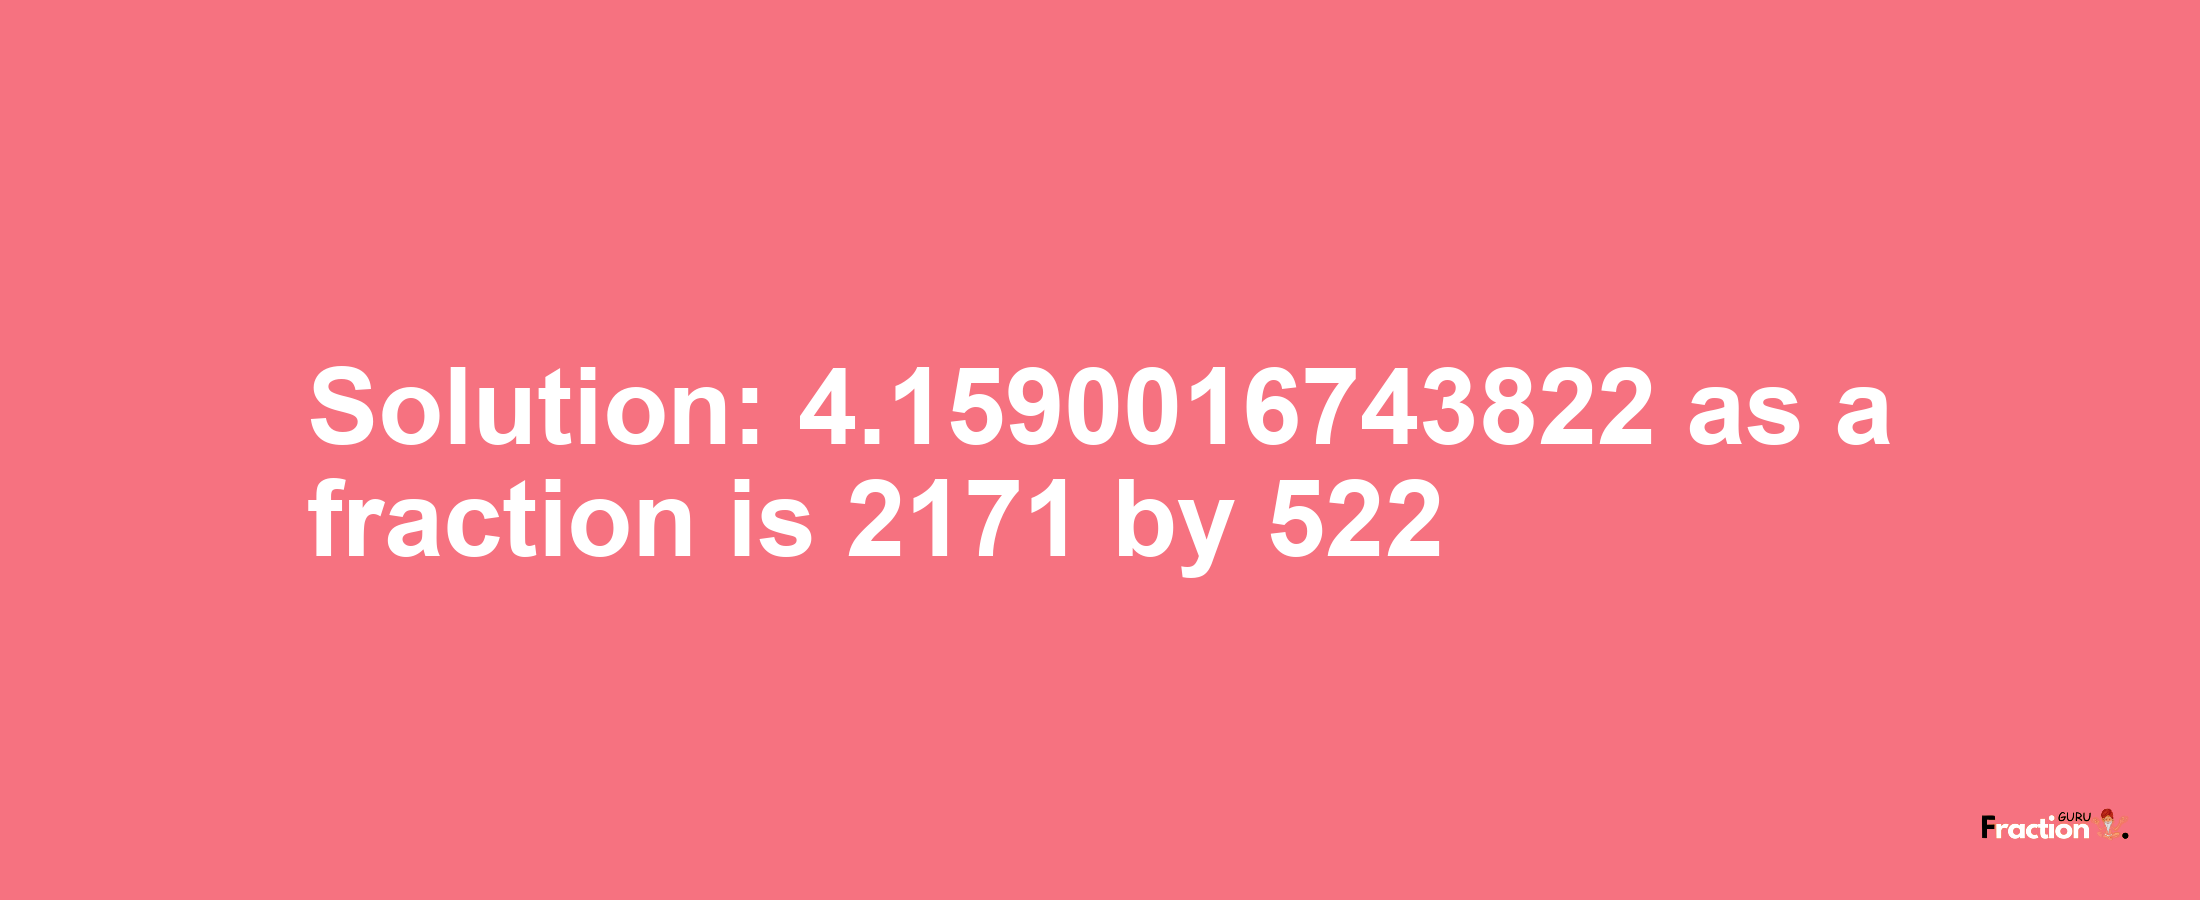 Solution:4.1590016743822 as a fraction is 2171/522